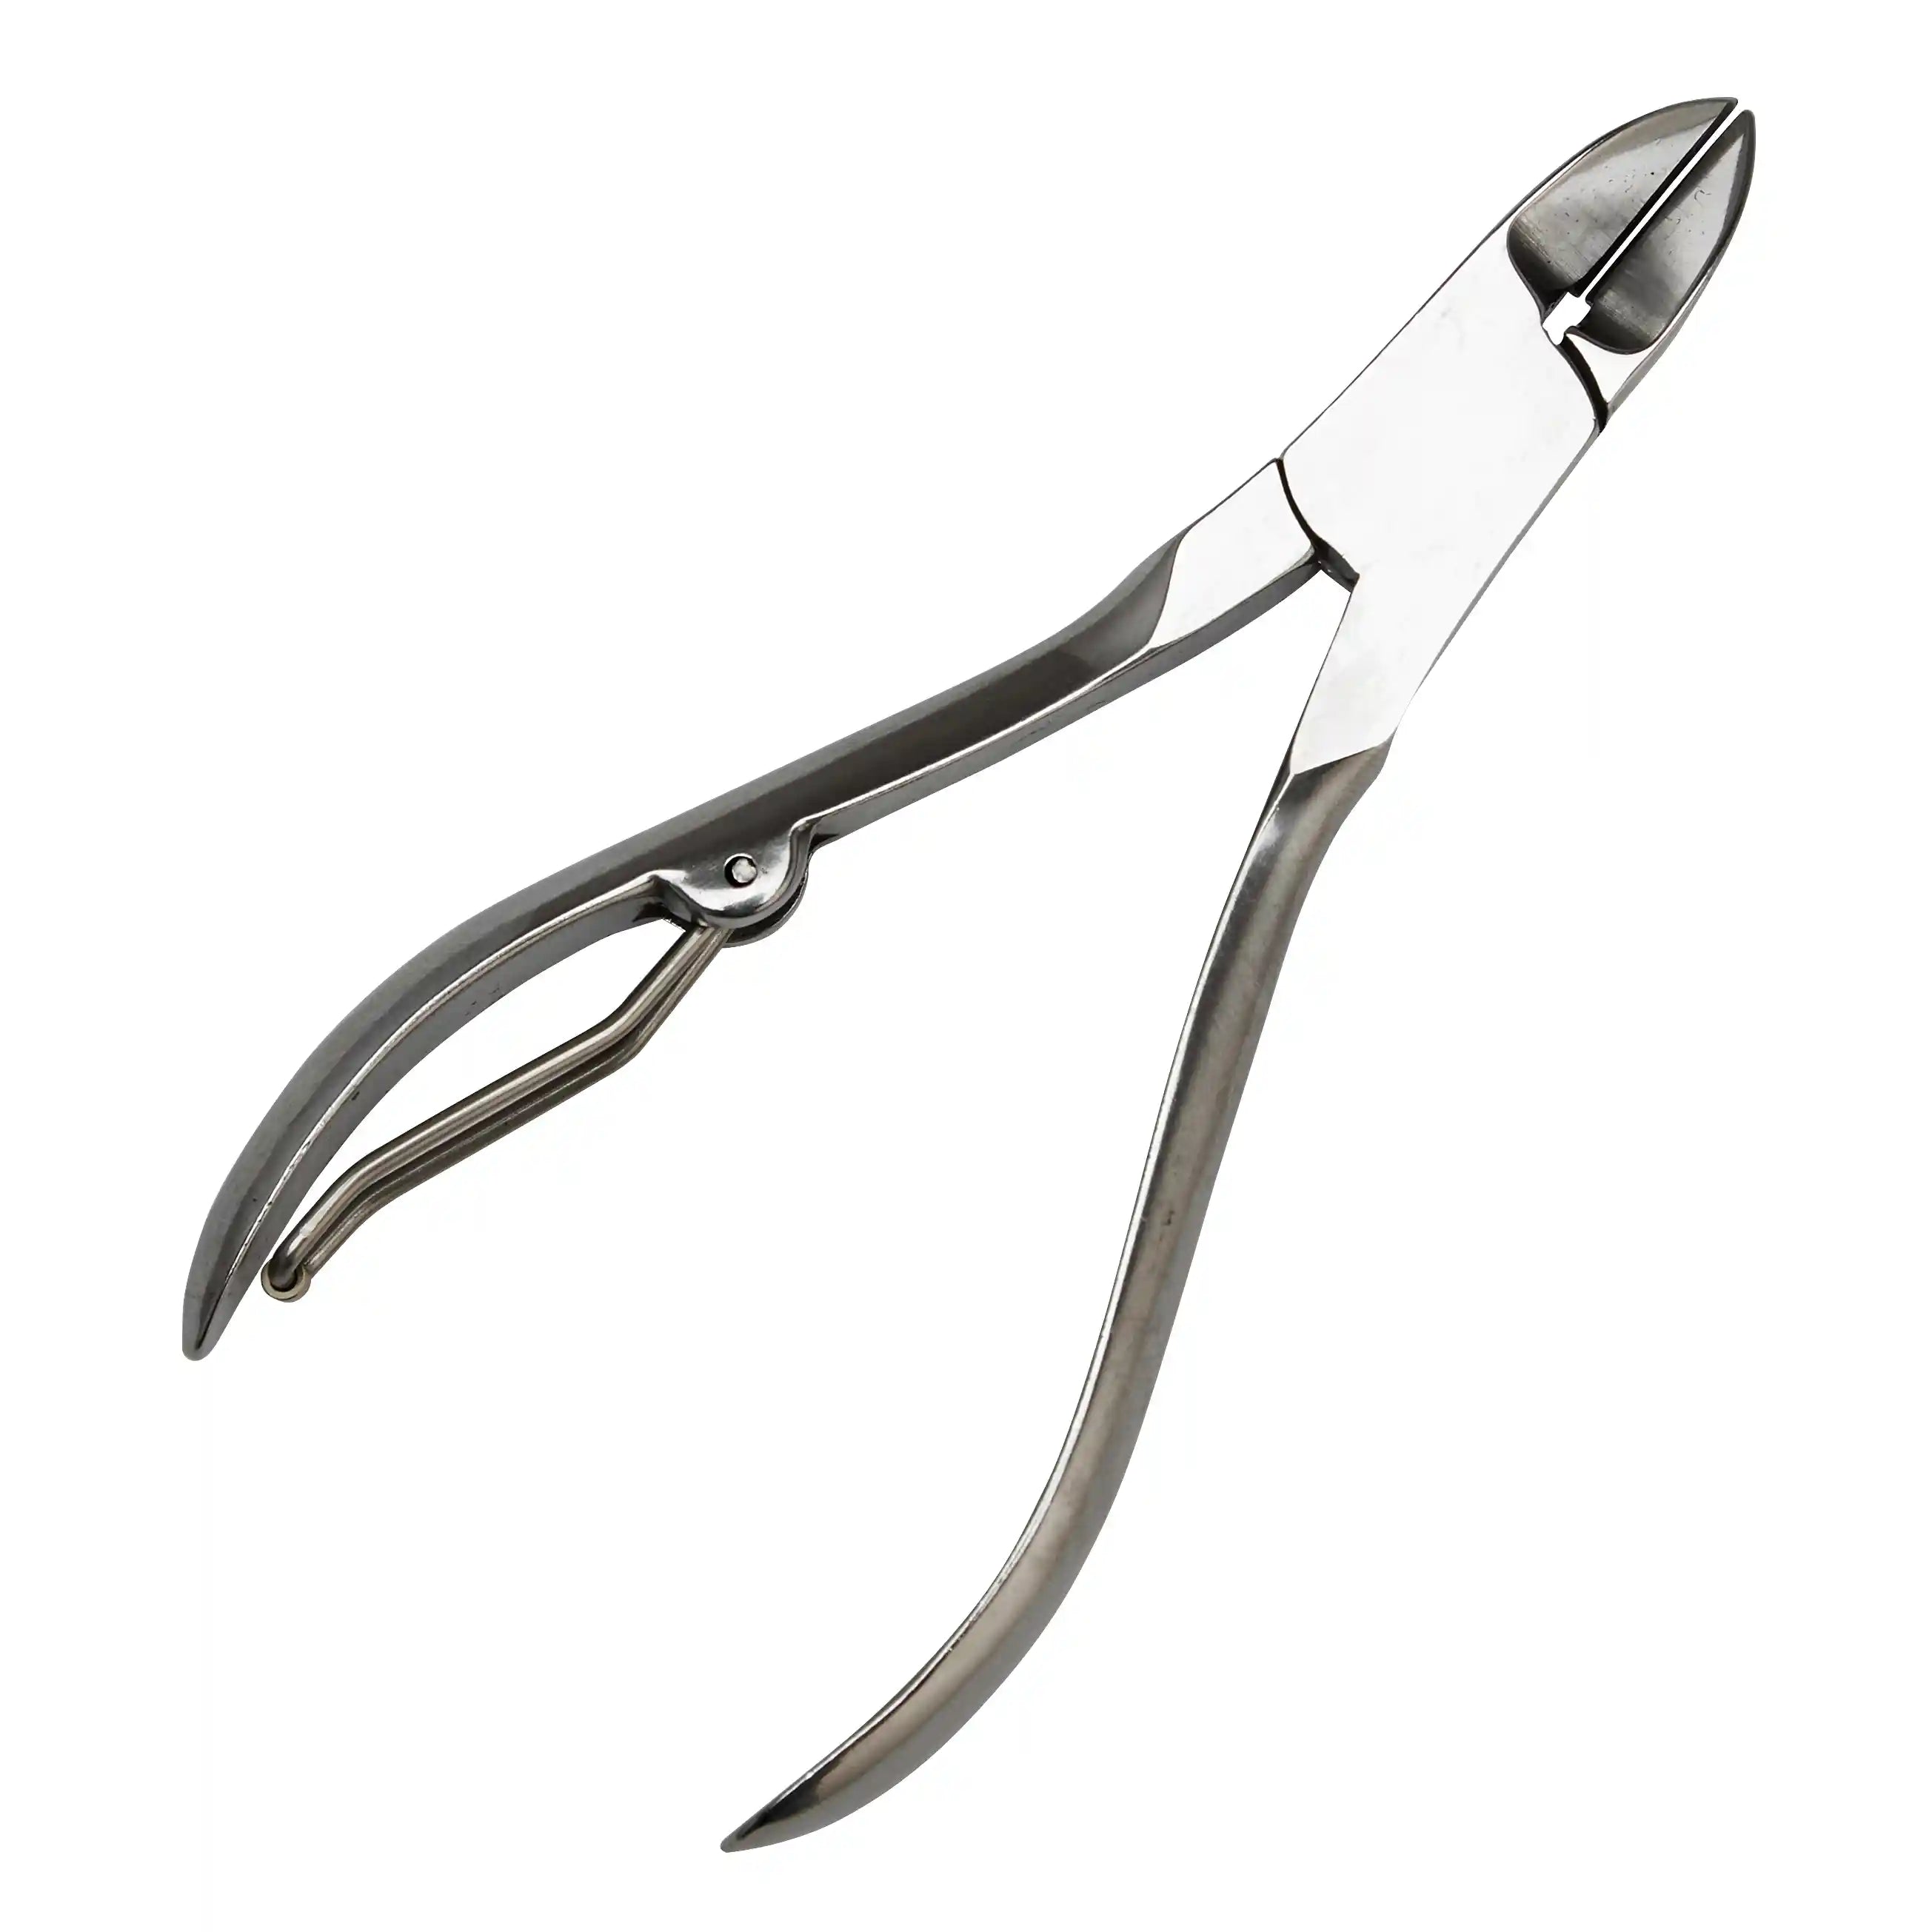 Pince à ongles Zwilling Classic Inox 11 cm - argent poli